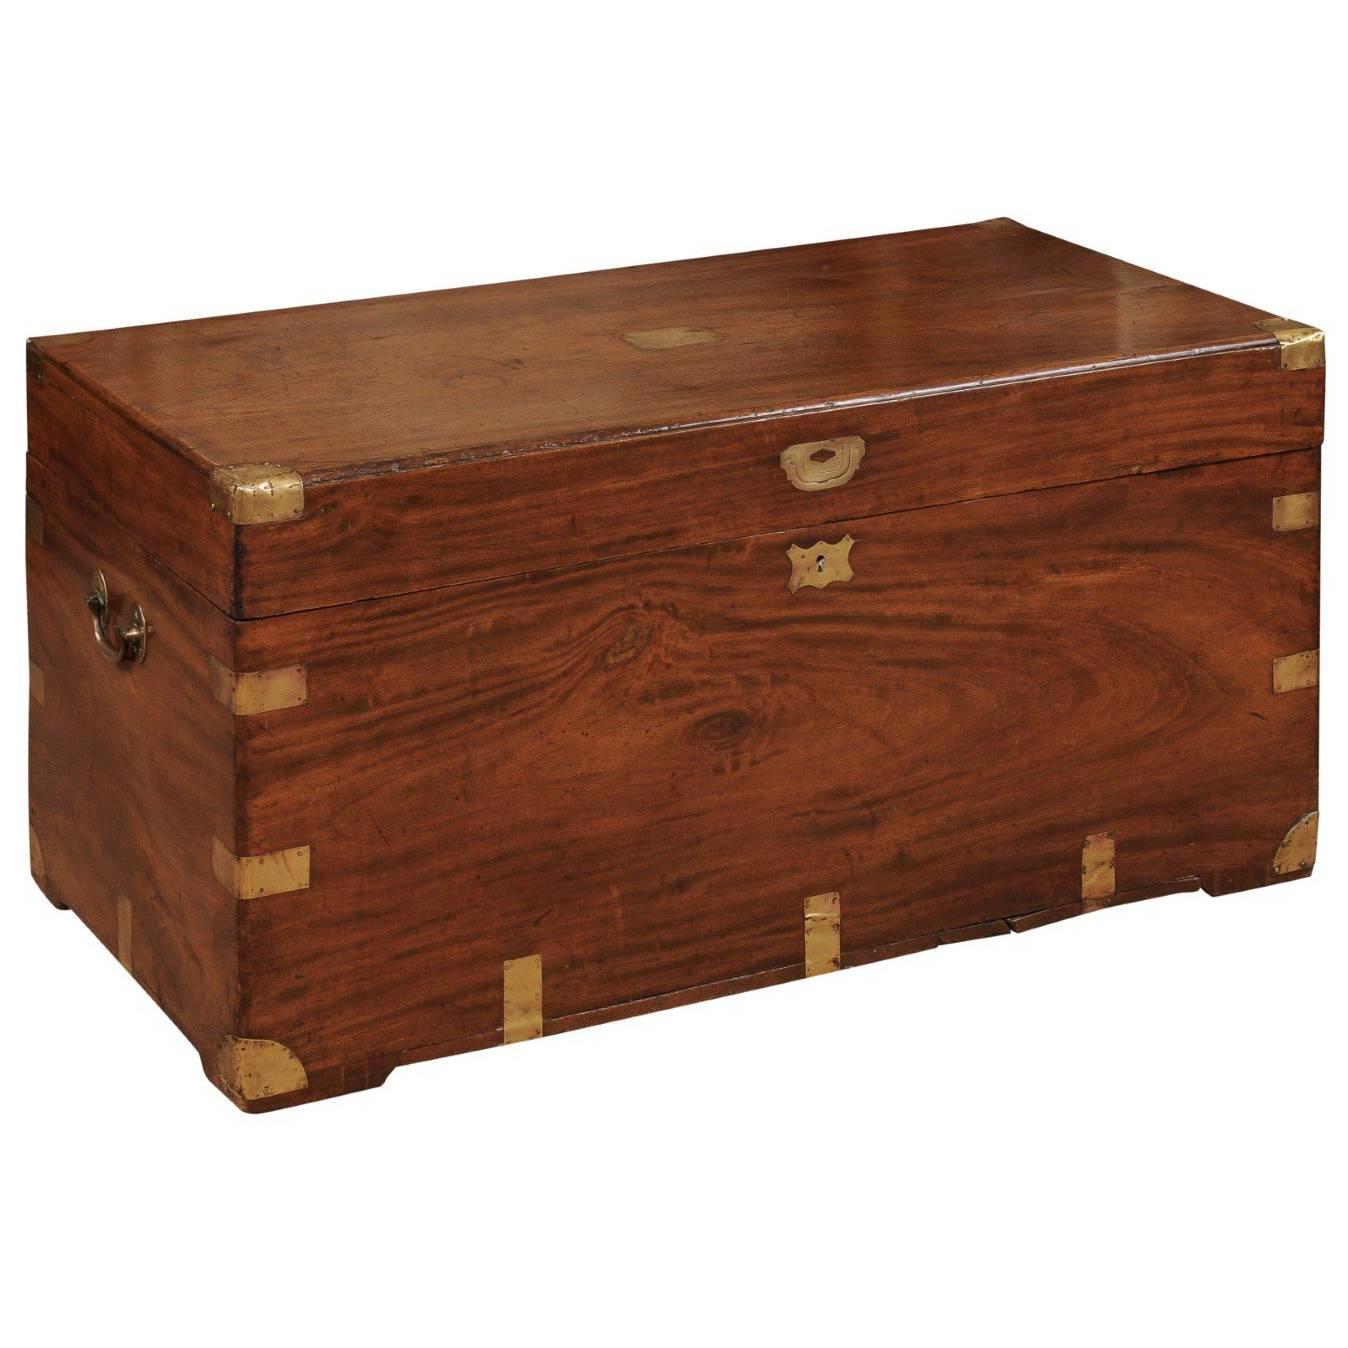 19th Century English Mahogany Trunk with Brass Mounts and Handles